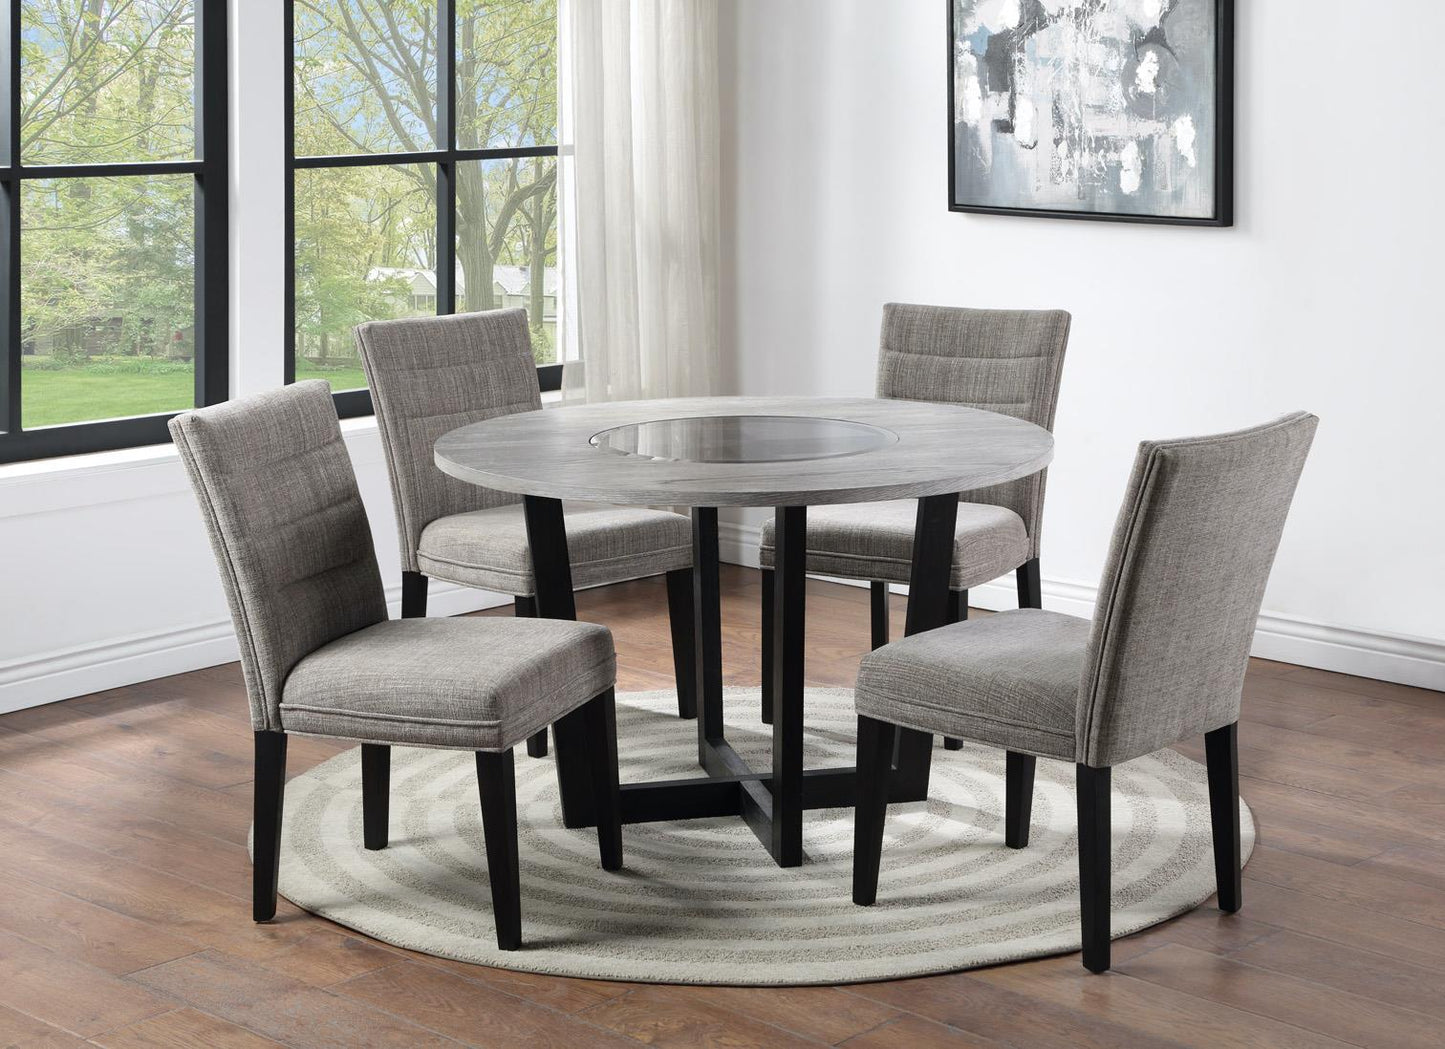 WEEKLY or MONTHLY. Washington Rectangular Table & 6 Side Chairs